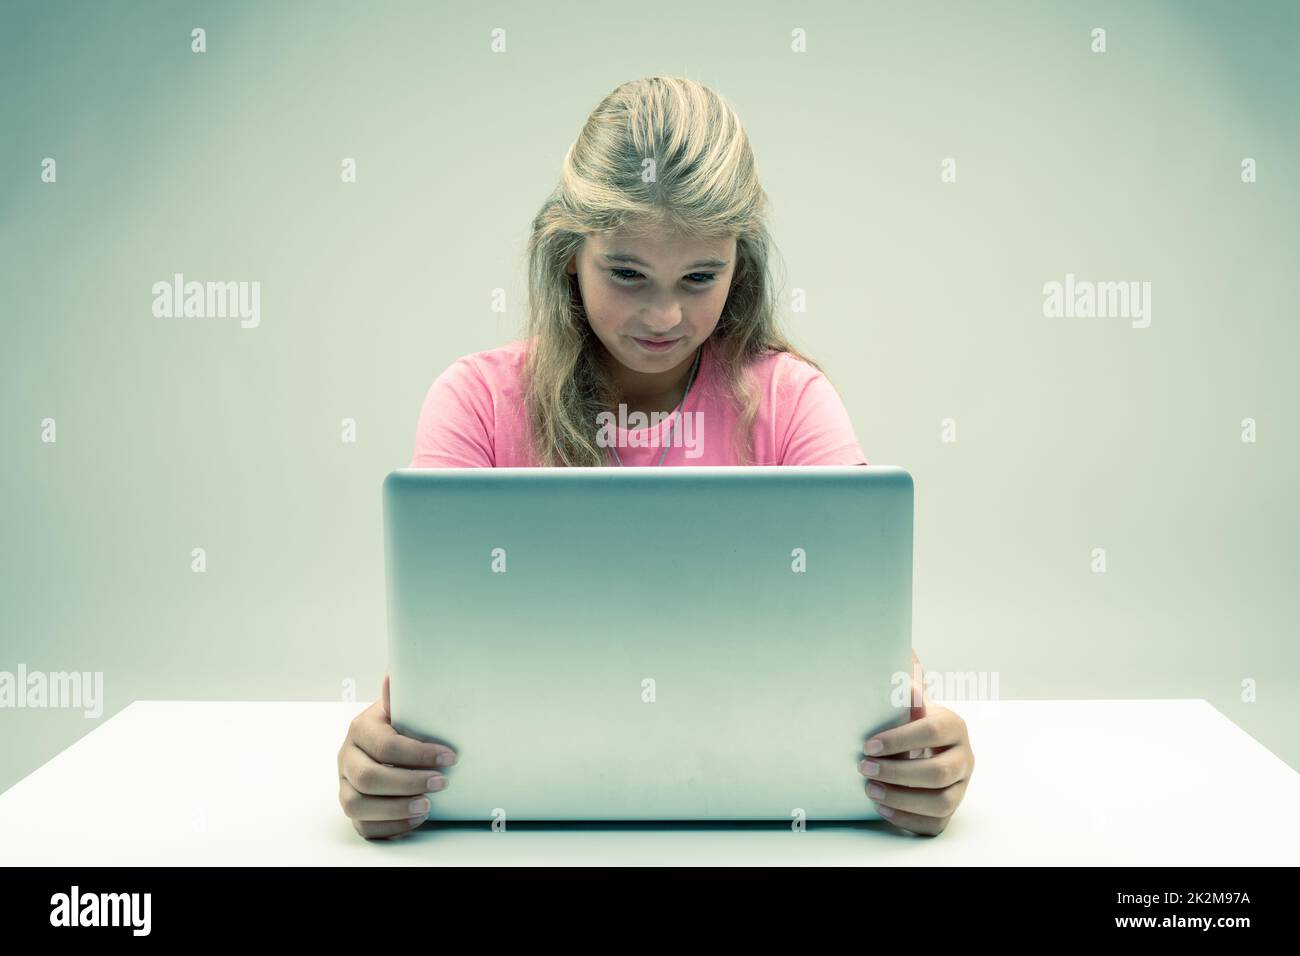 Young girl looking at her laptop with distaste Stock Photo